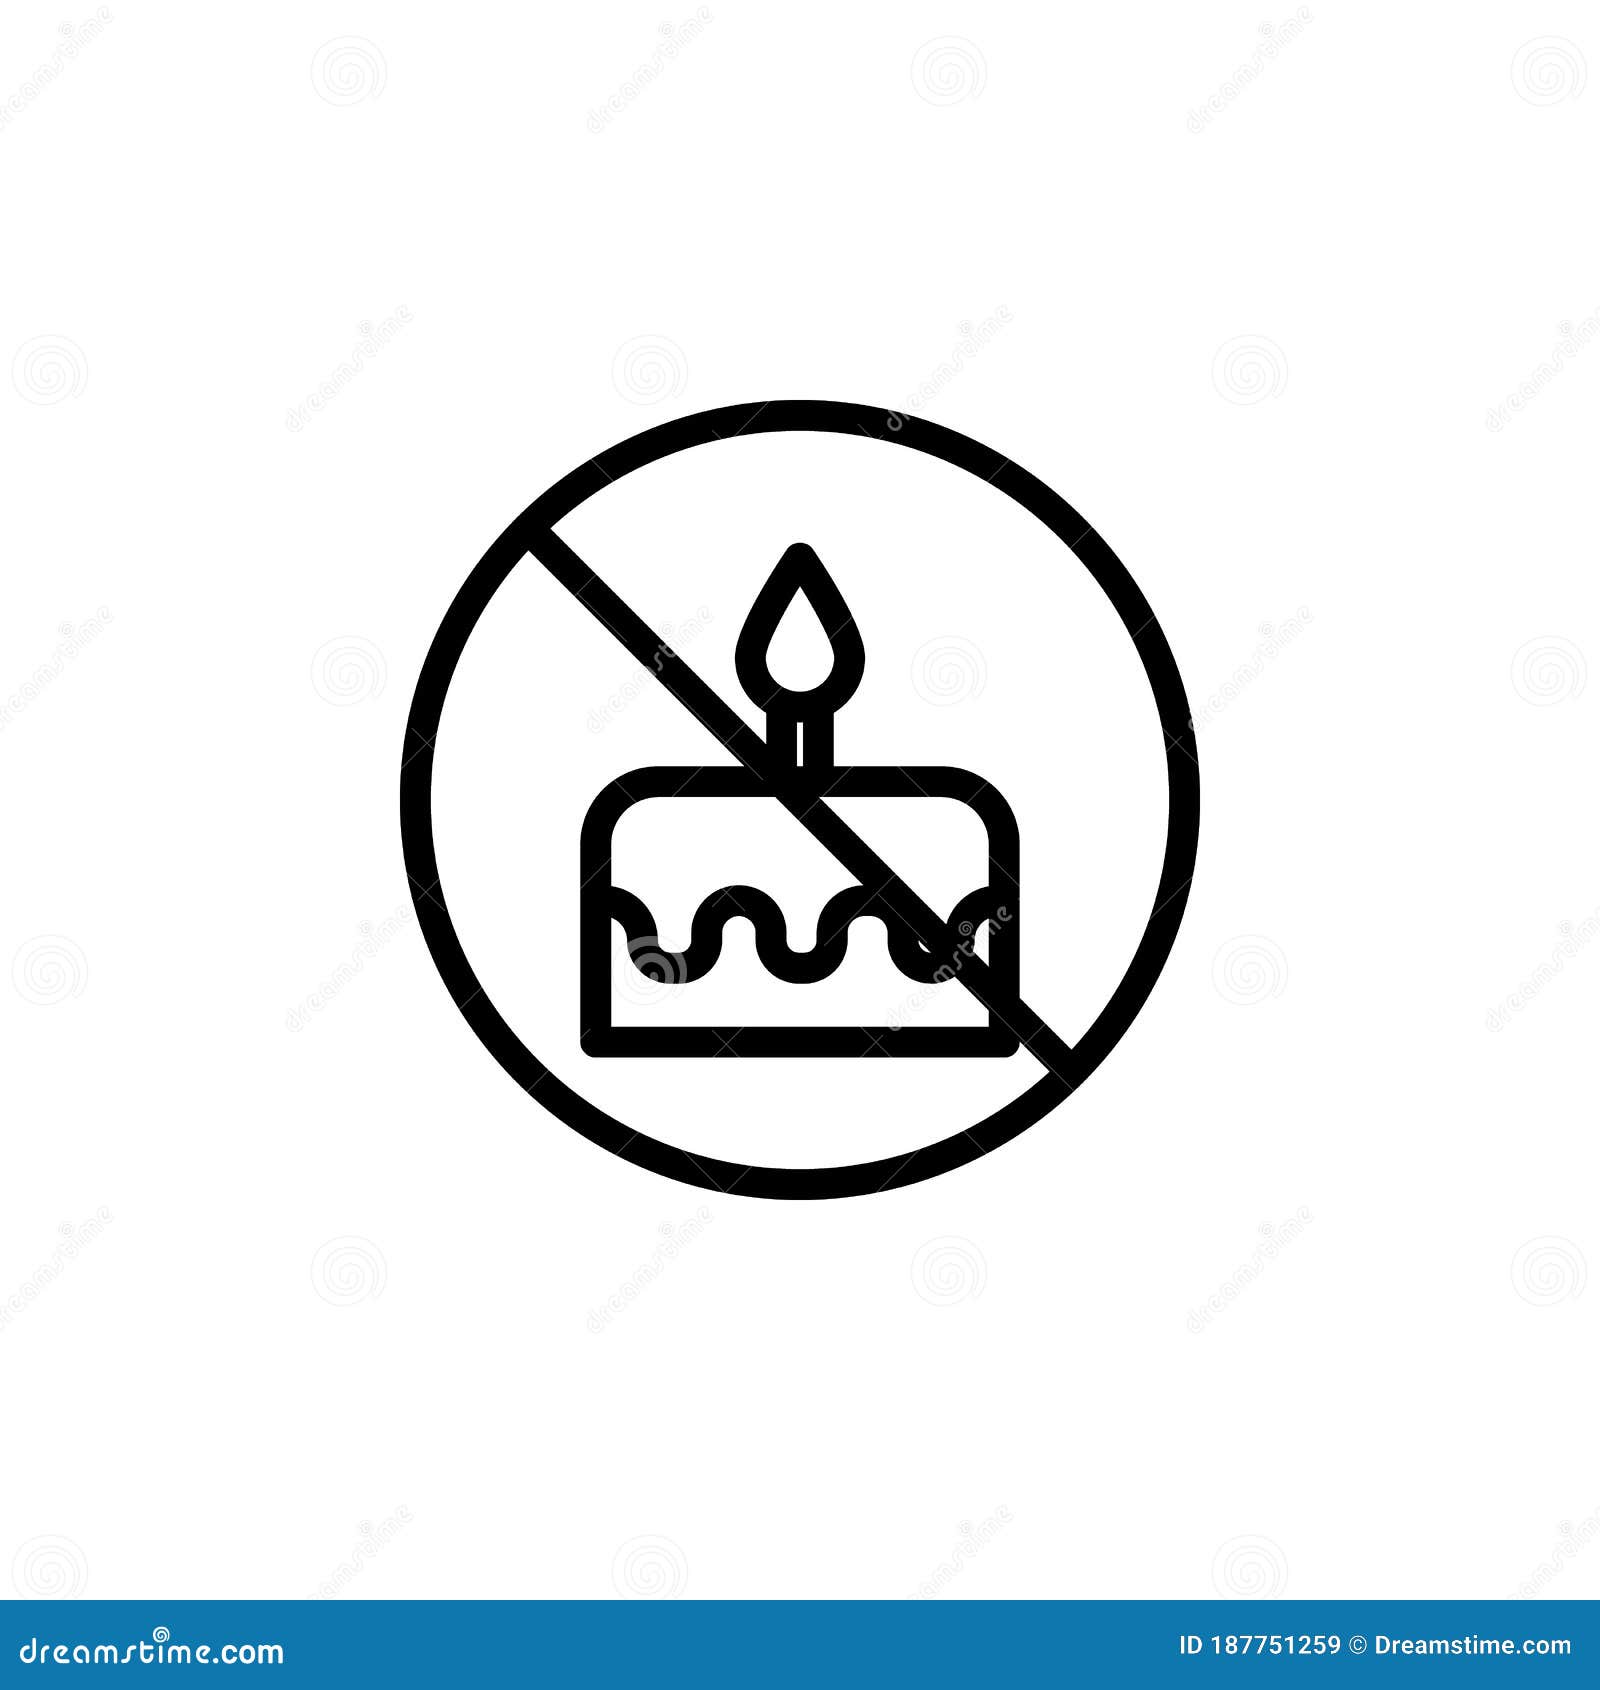 Birth Ban Icon Detailed Set Of Farm Icons Premium Quality Graphic Design Icon One Of The Collection Icons For Websites Web Stock Illustration Illustration Of Background Restricted